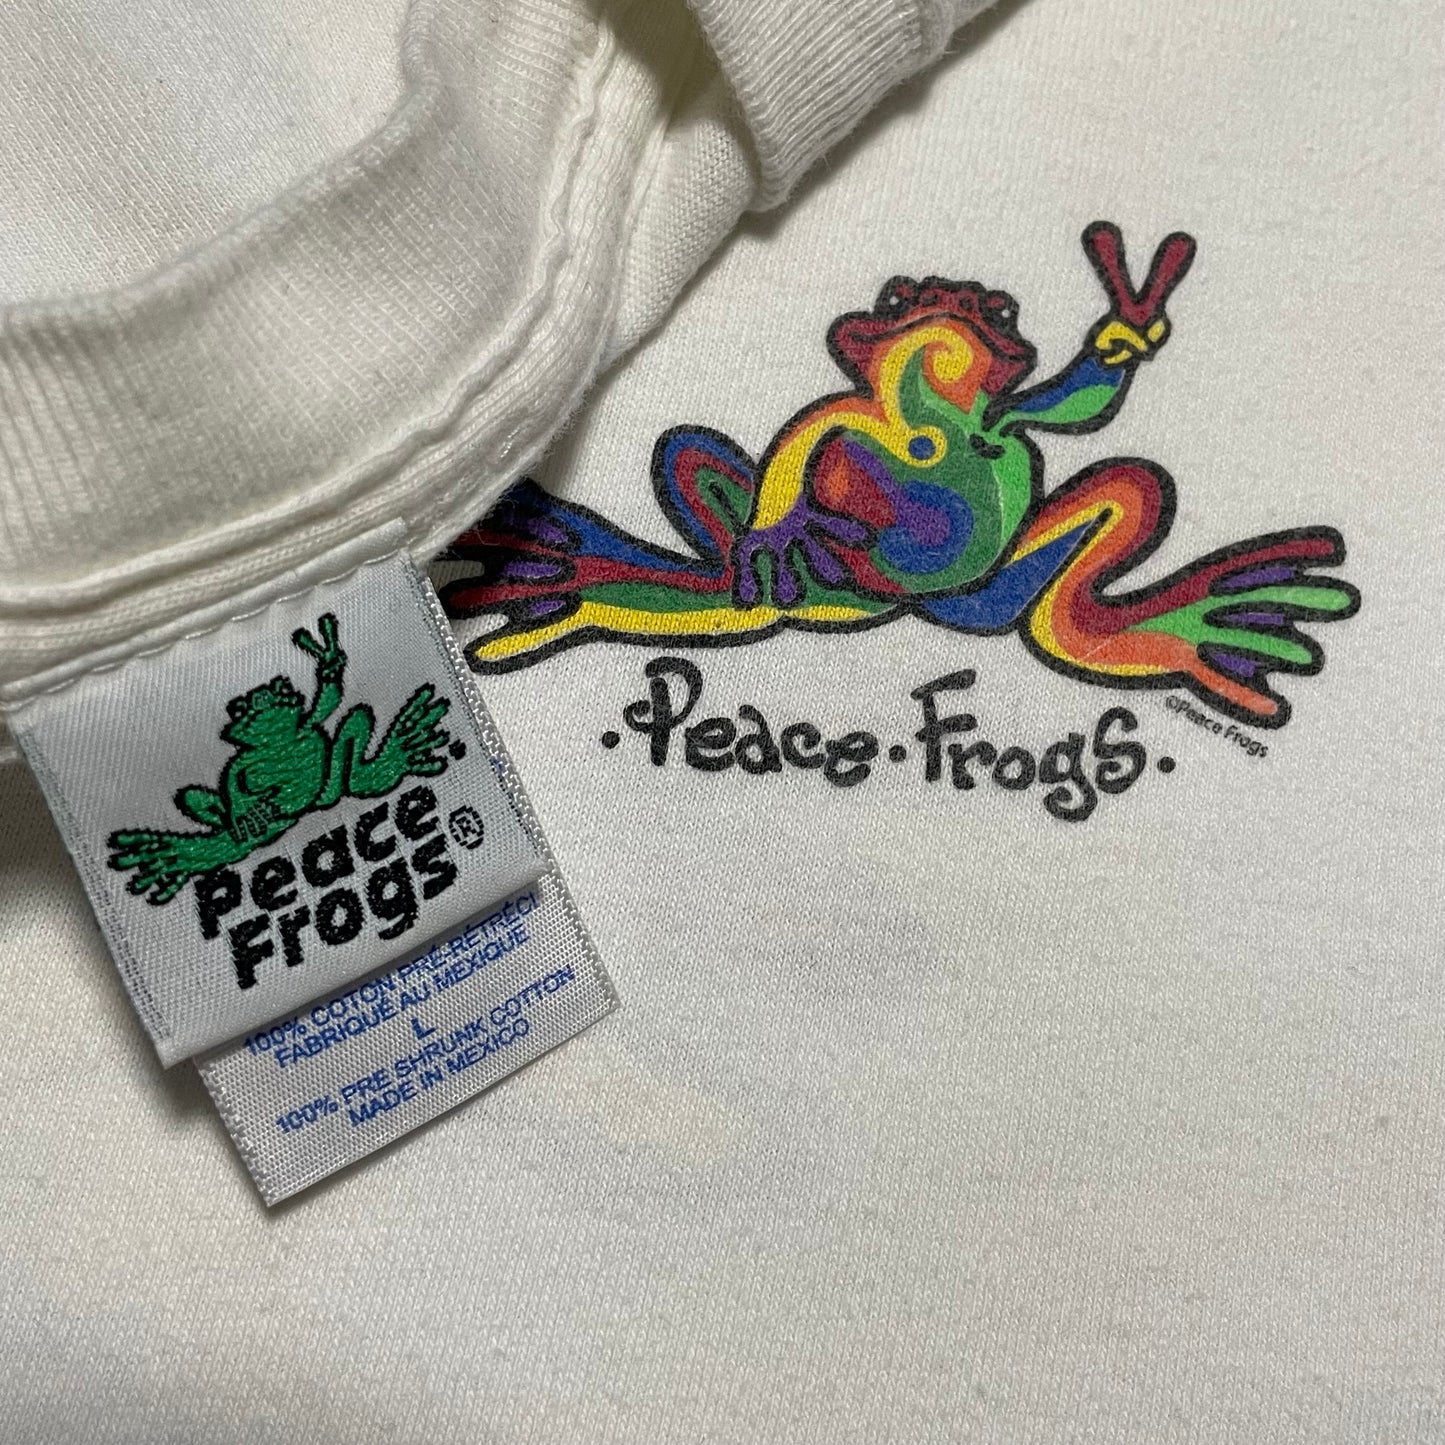 Vintage Peace Frogs T-Shirt